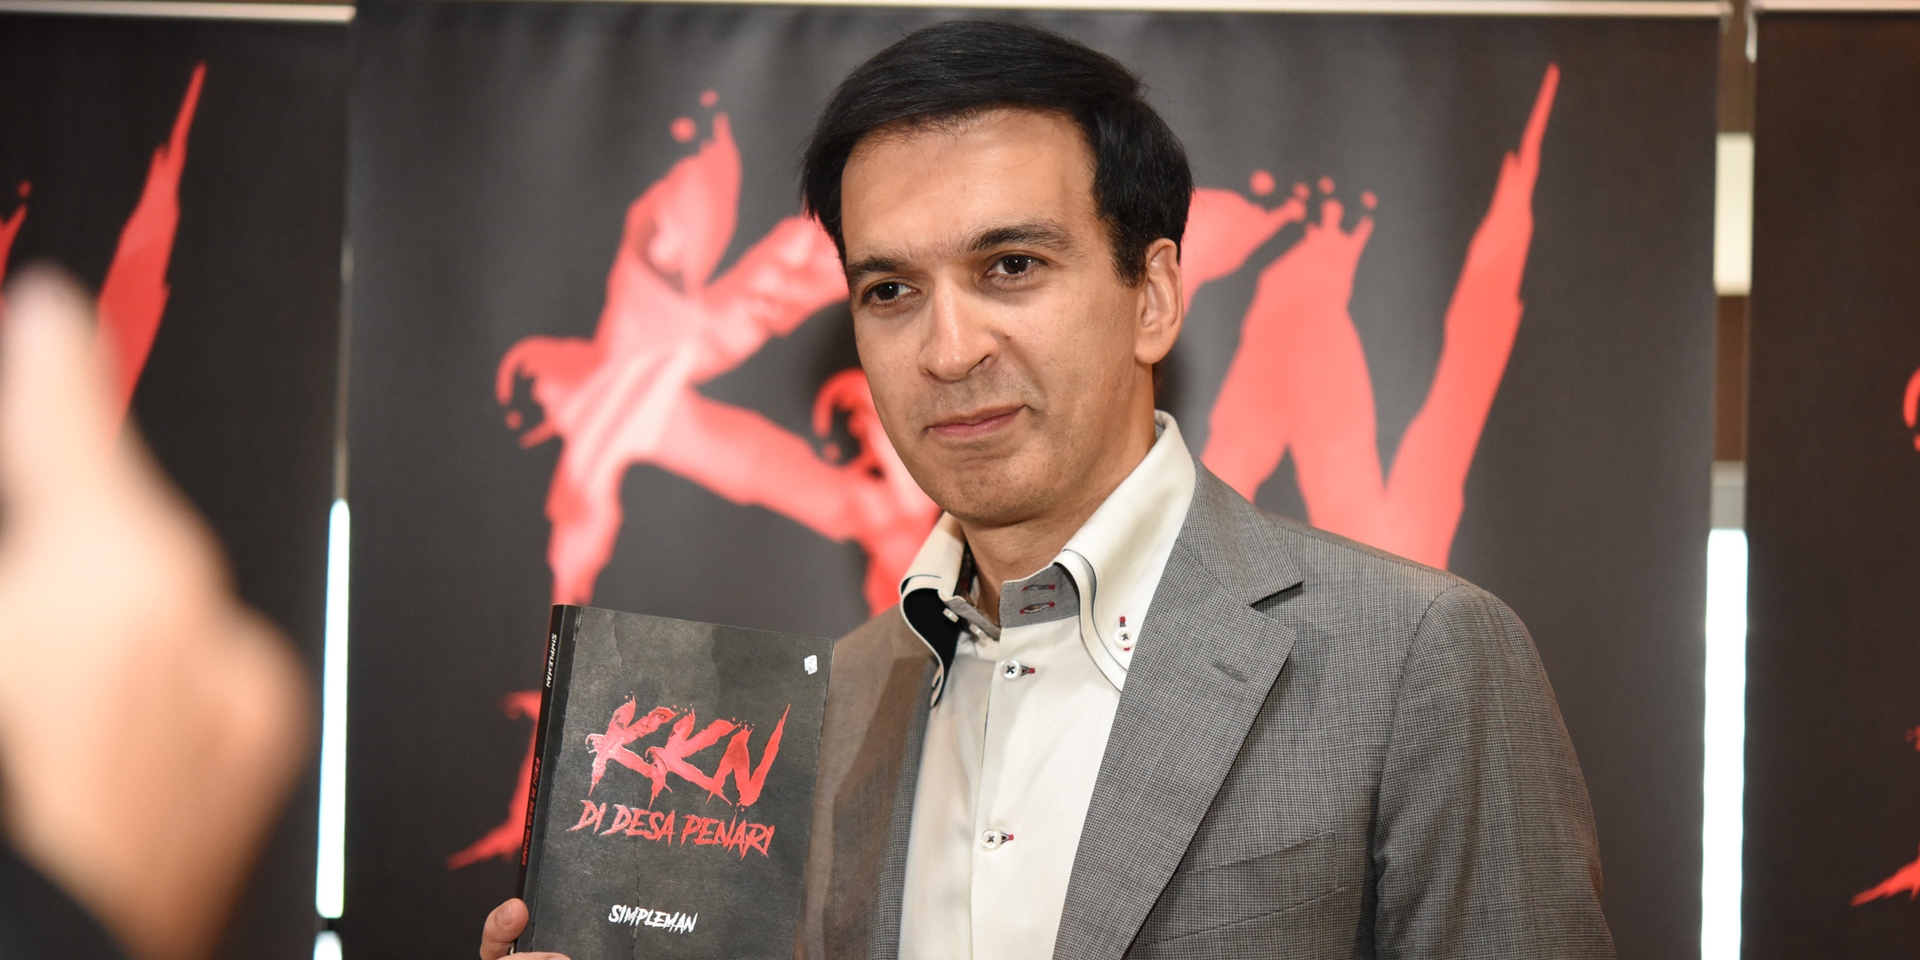 Manoj Punjabi Says the Story in the Movie 'KKN DI DESA PENARI' Will be Exactly the Same as the Story in the Social Media Version and the Book